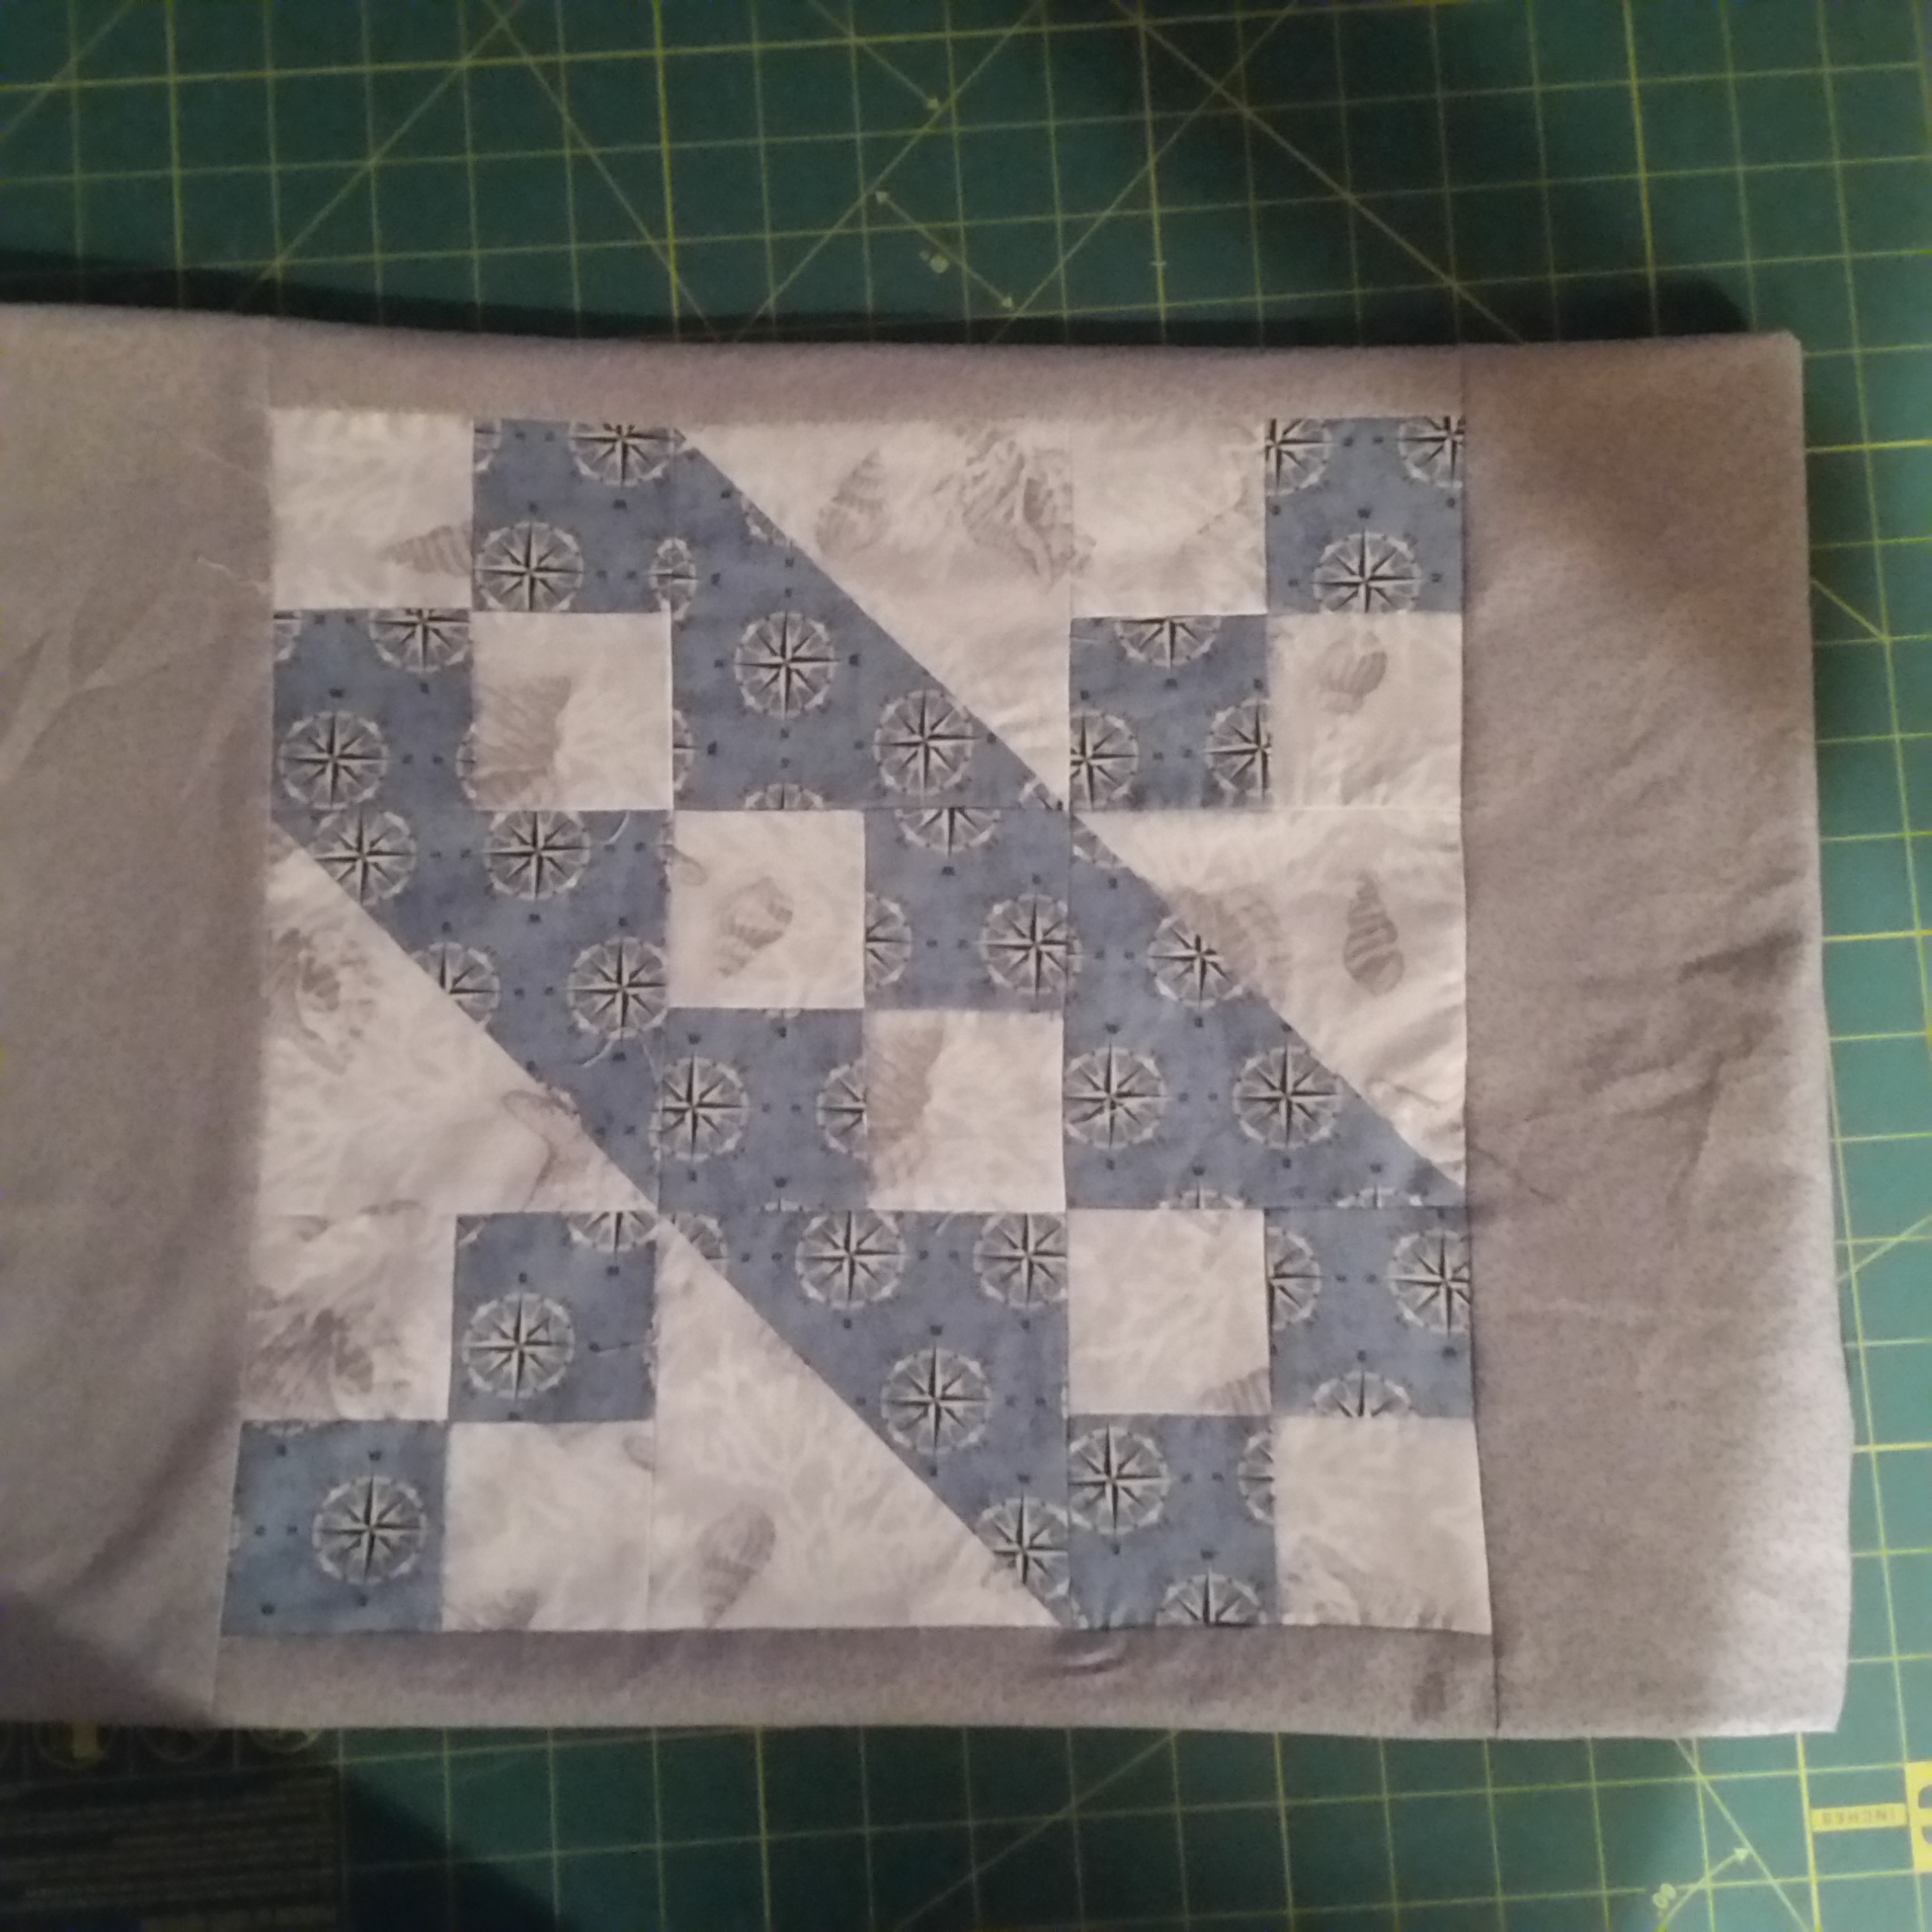 A Bit of Scrap Stuff - Sewing, Quilting, and Fabric Fun: Placemats with Fat  Quarter Shop Sew Along with ByAnnie's Soft and Stable